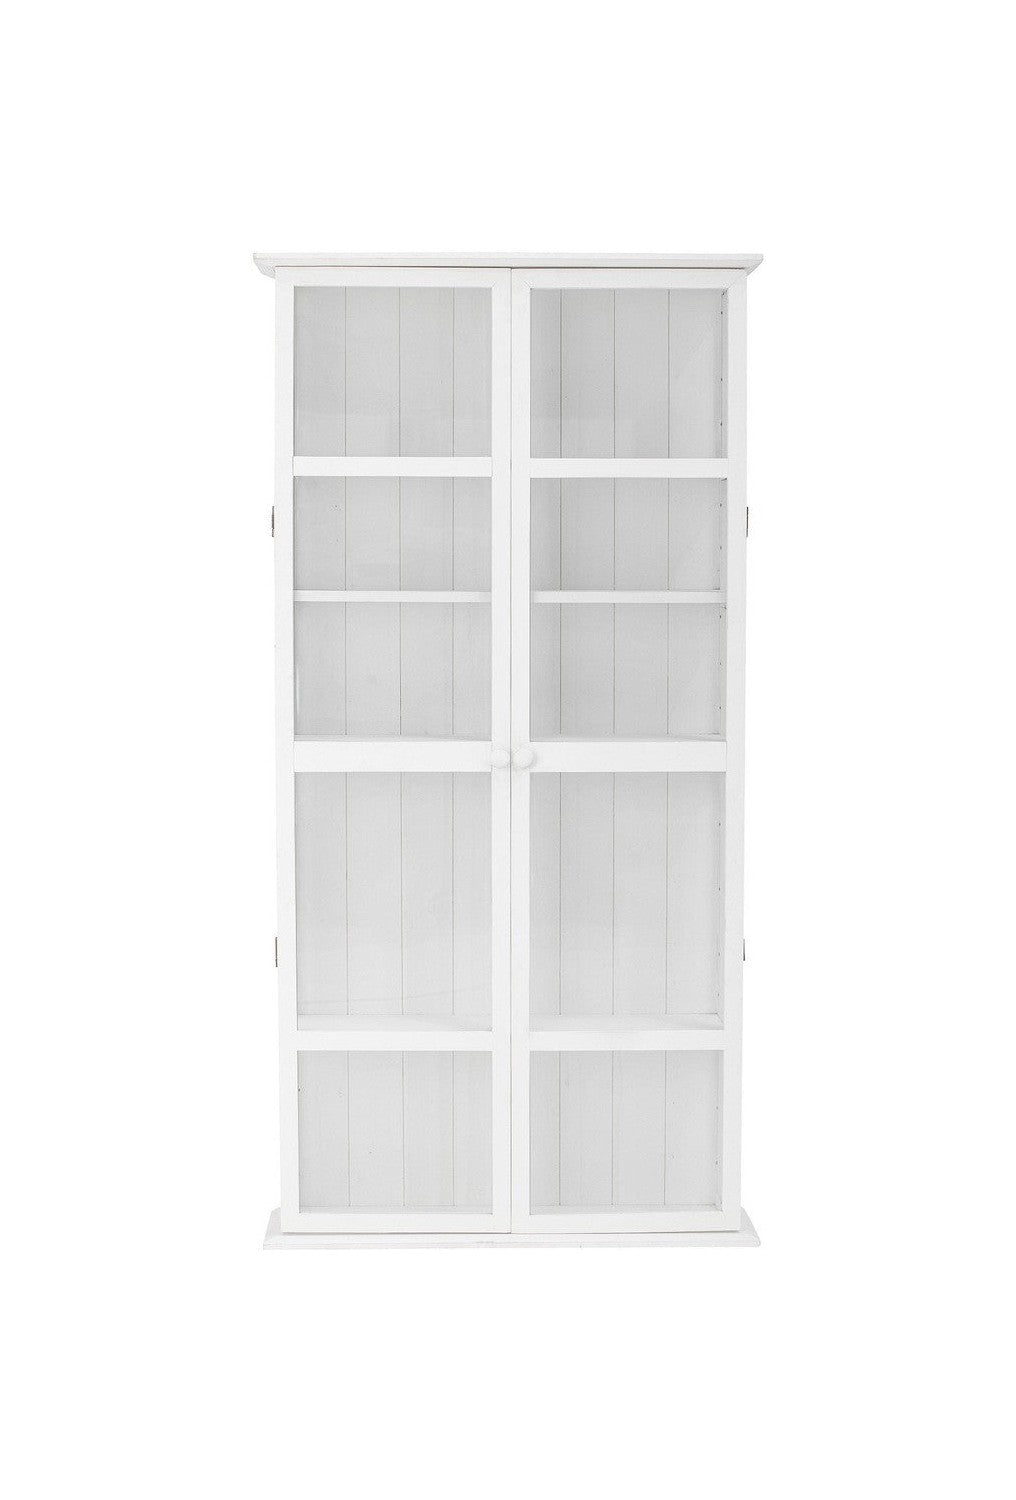 Bloomingville Wila Cabinet, White, Firwood